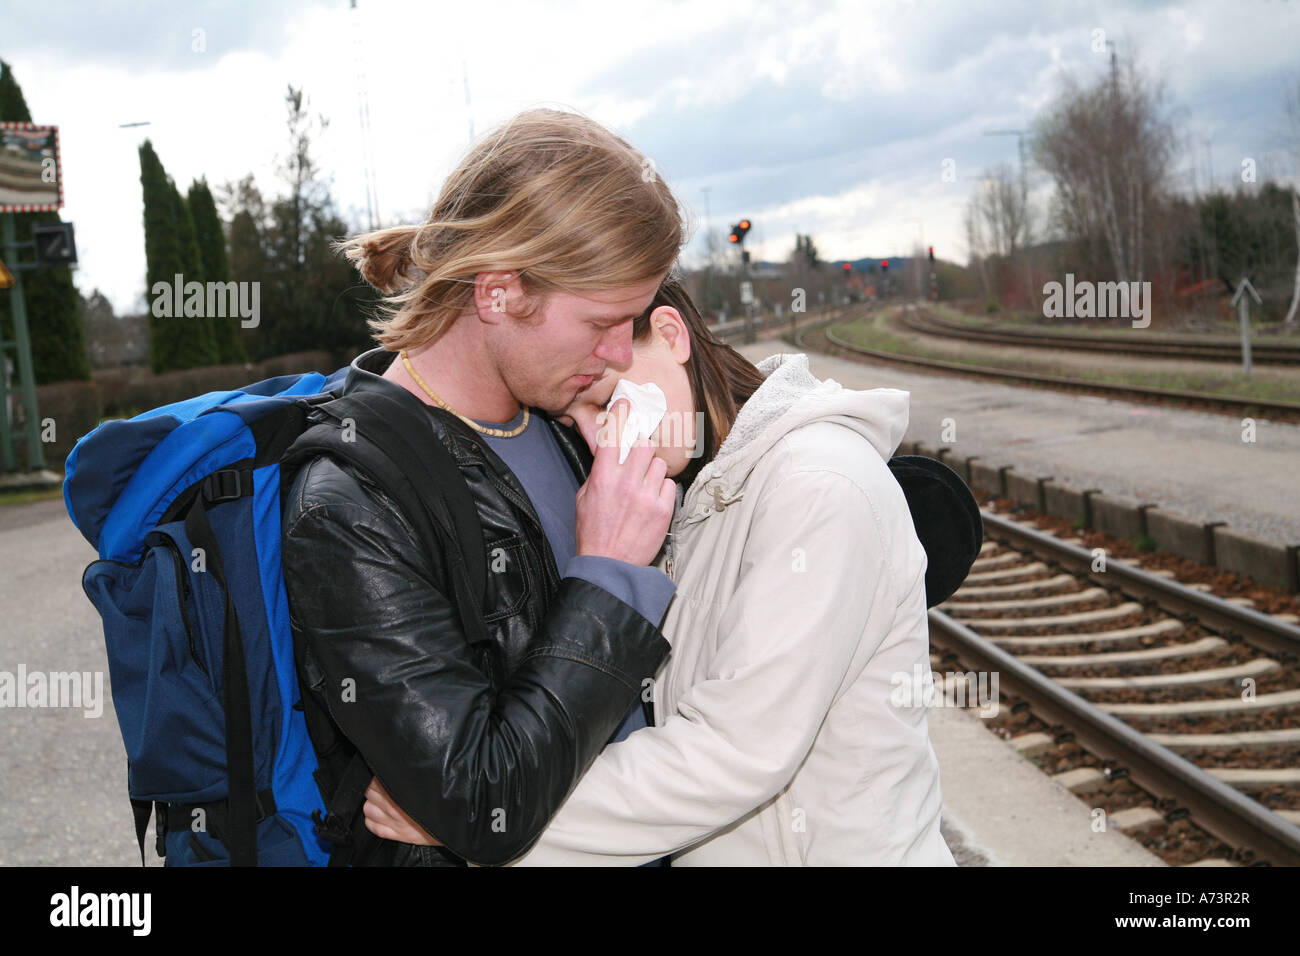 young couple at a railway station Stock Photo